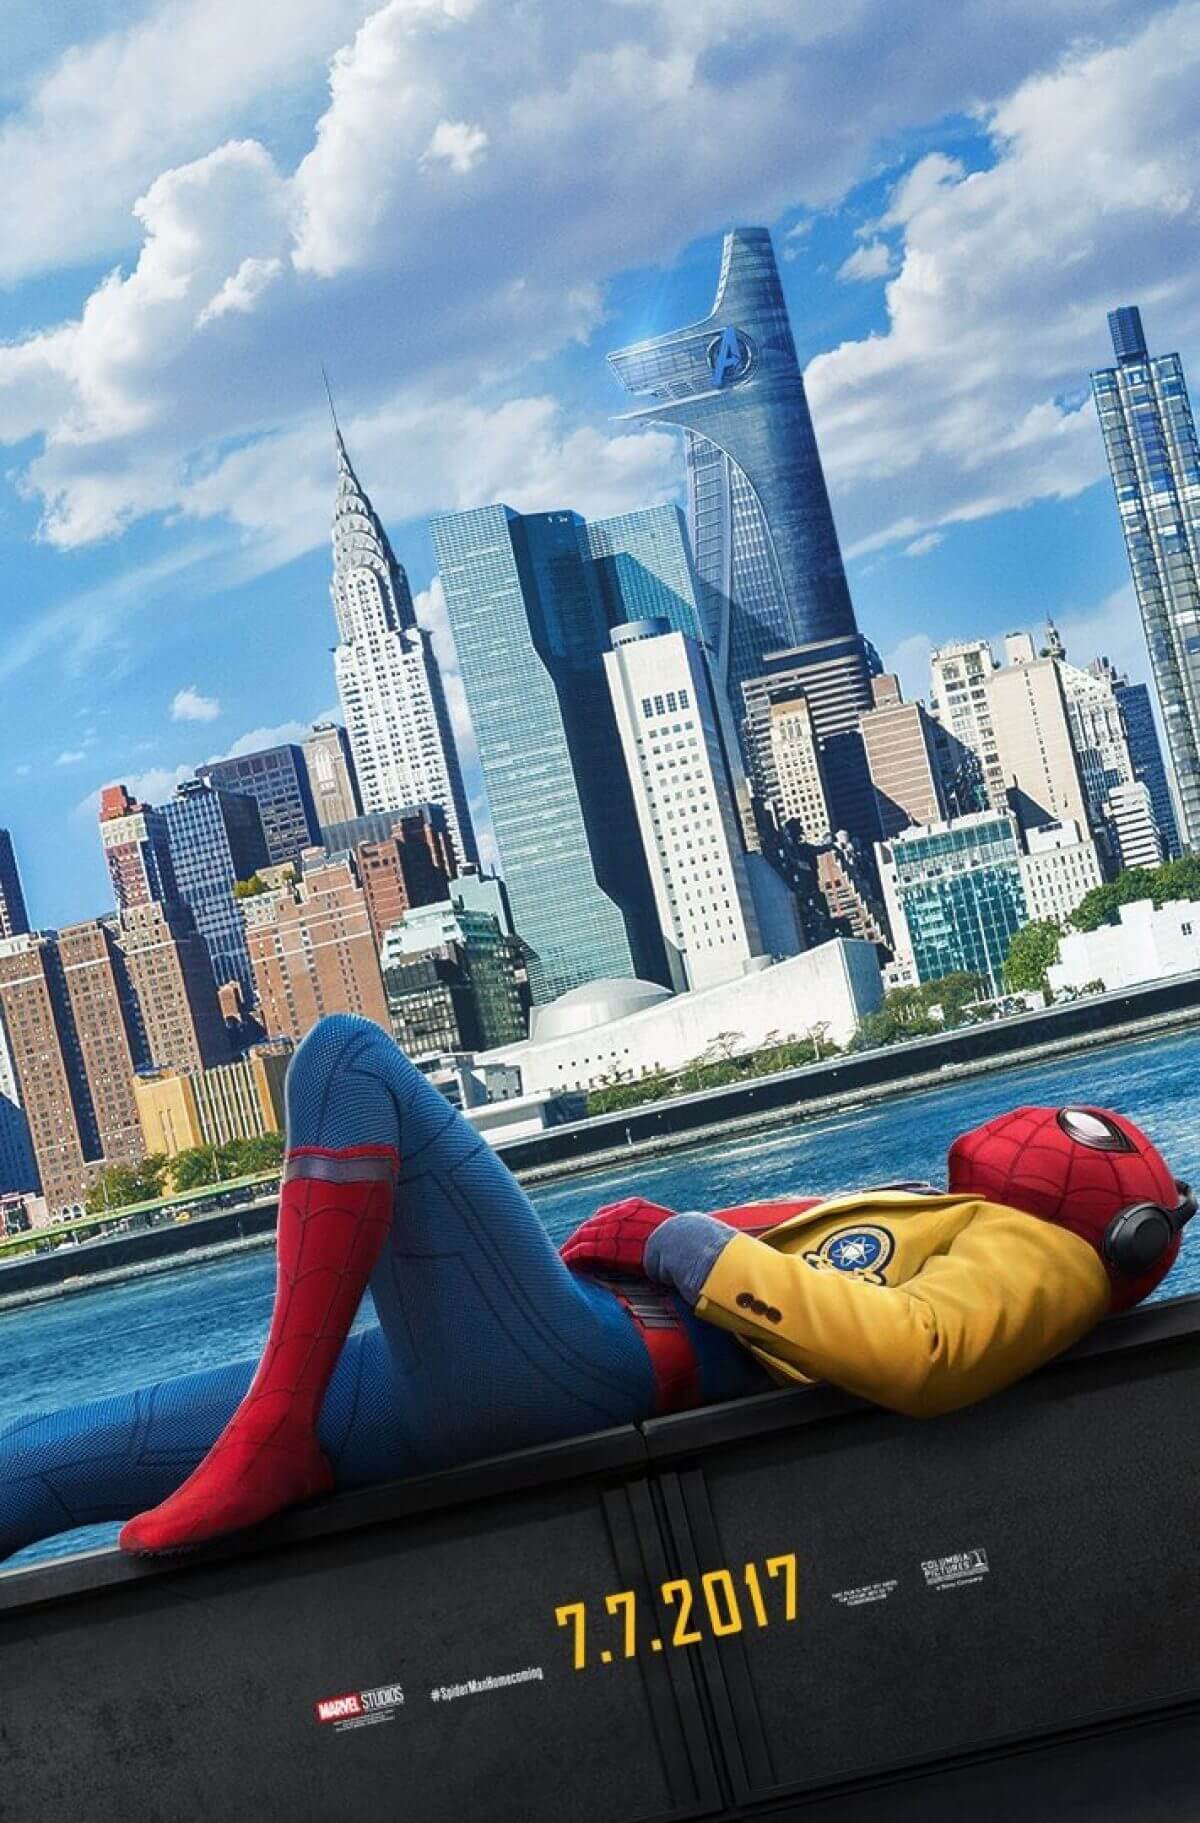 First Look At Newest Spiderman: Homecoming [Trailer]